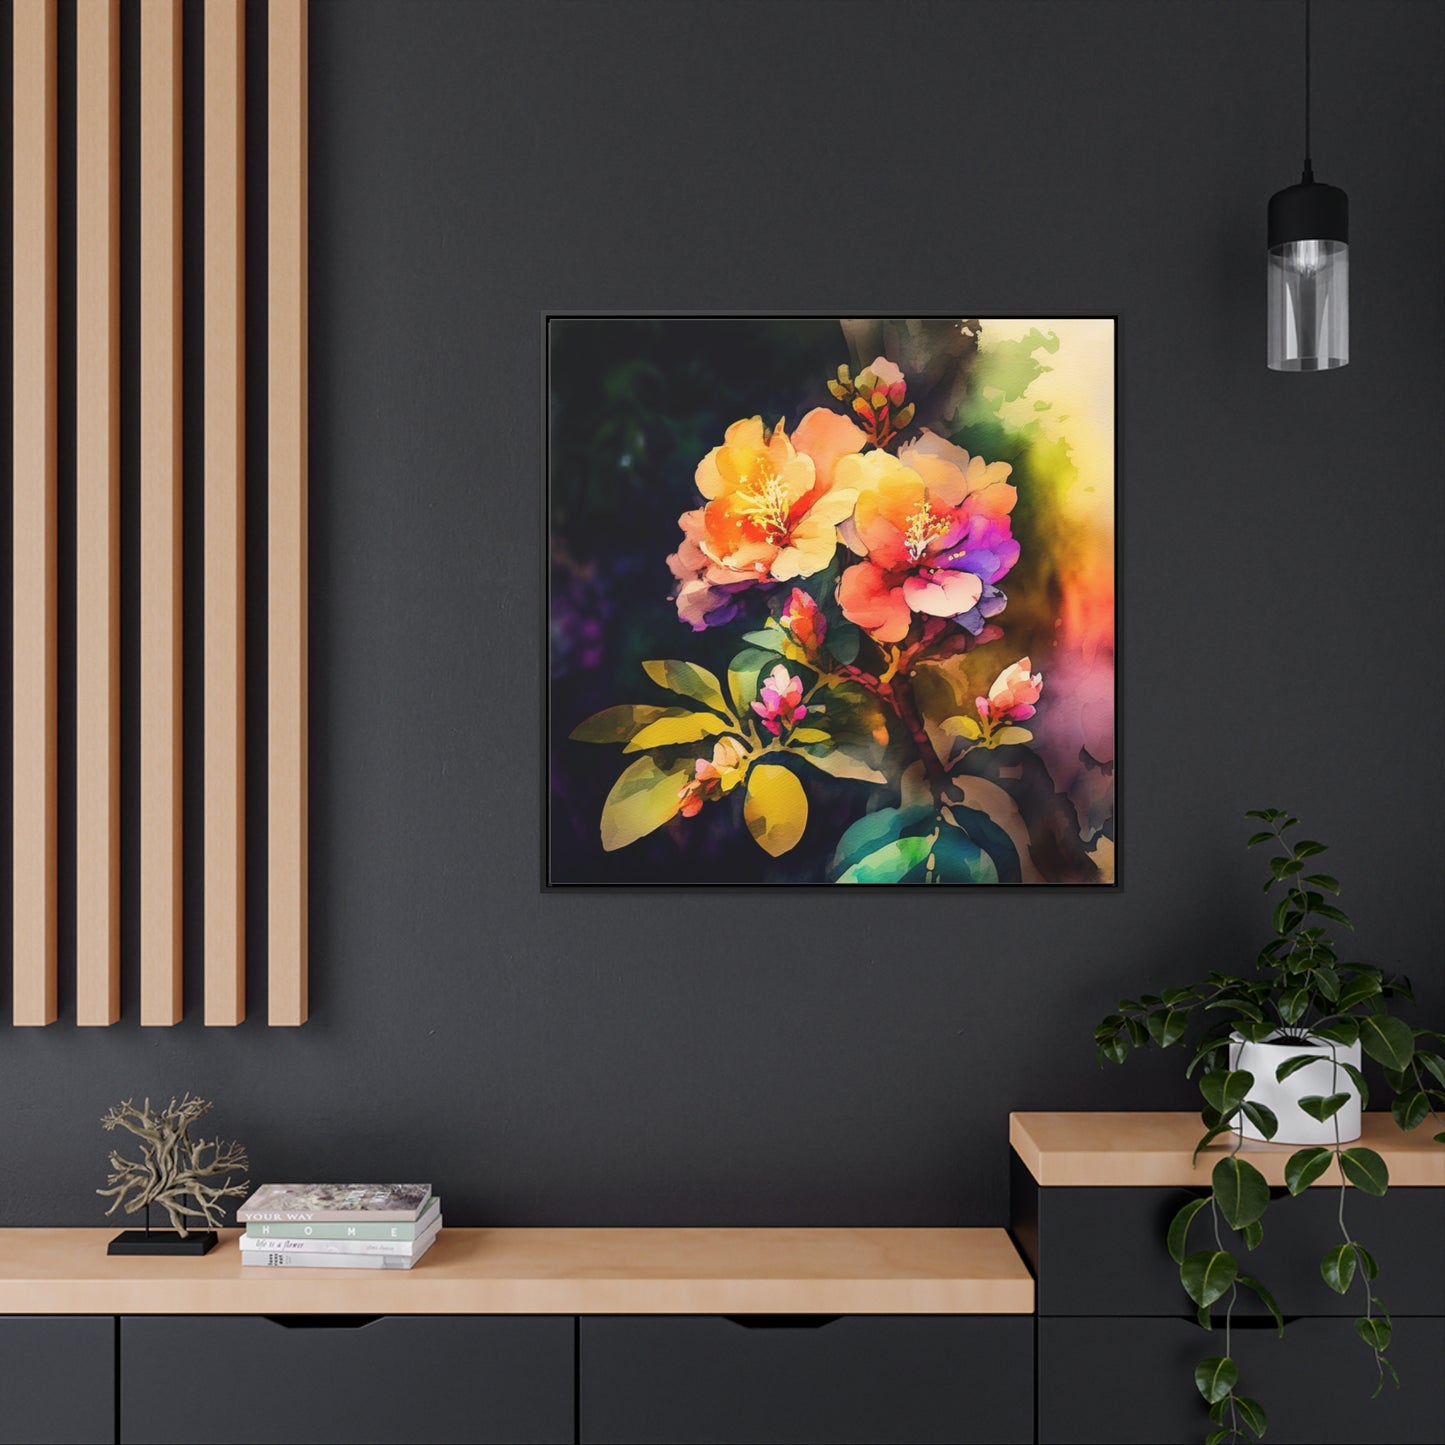 Gallery Canvas Wraps, Square Frame Bright Spring Flowers 2